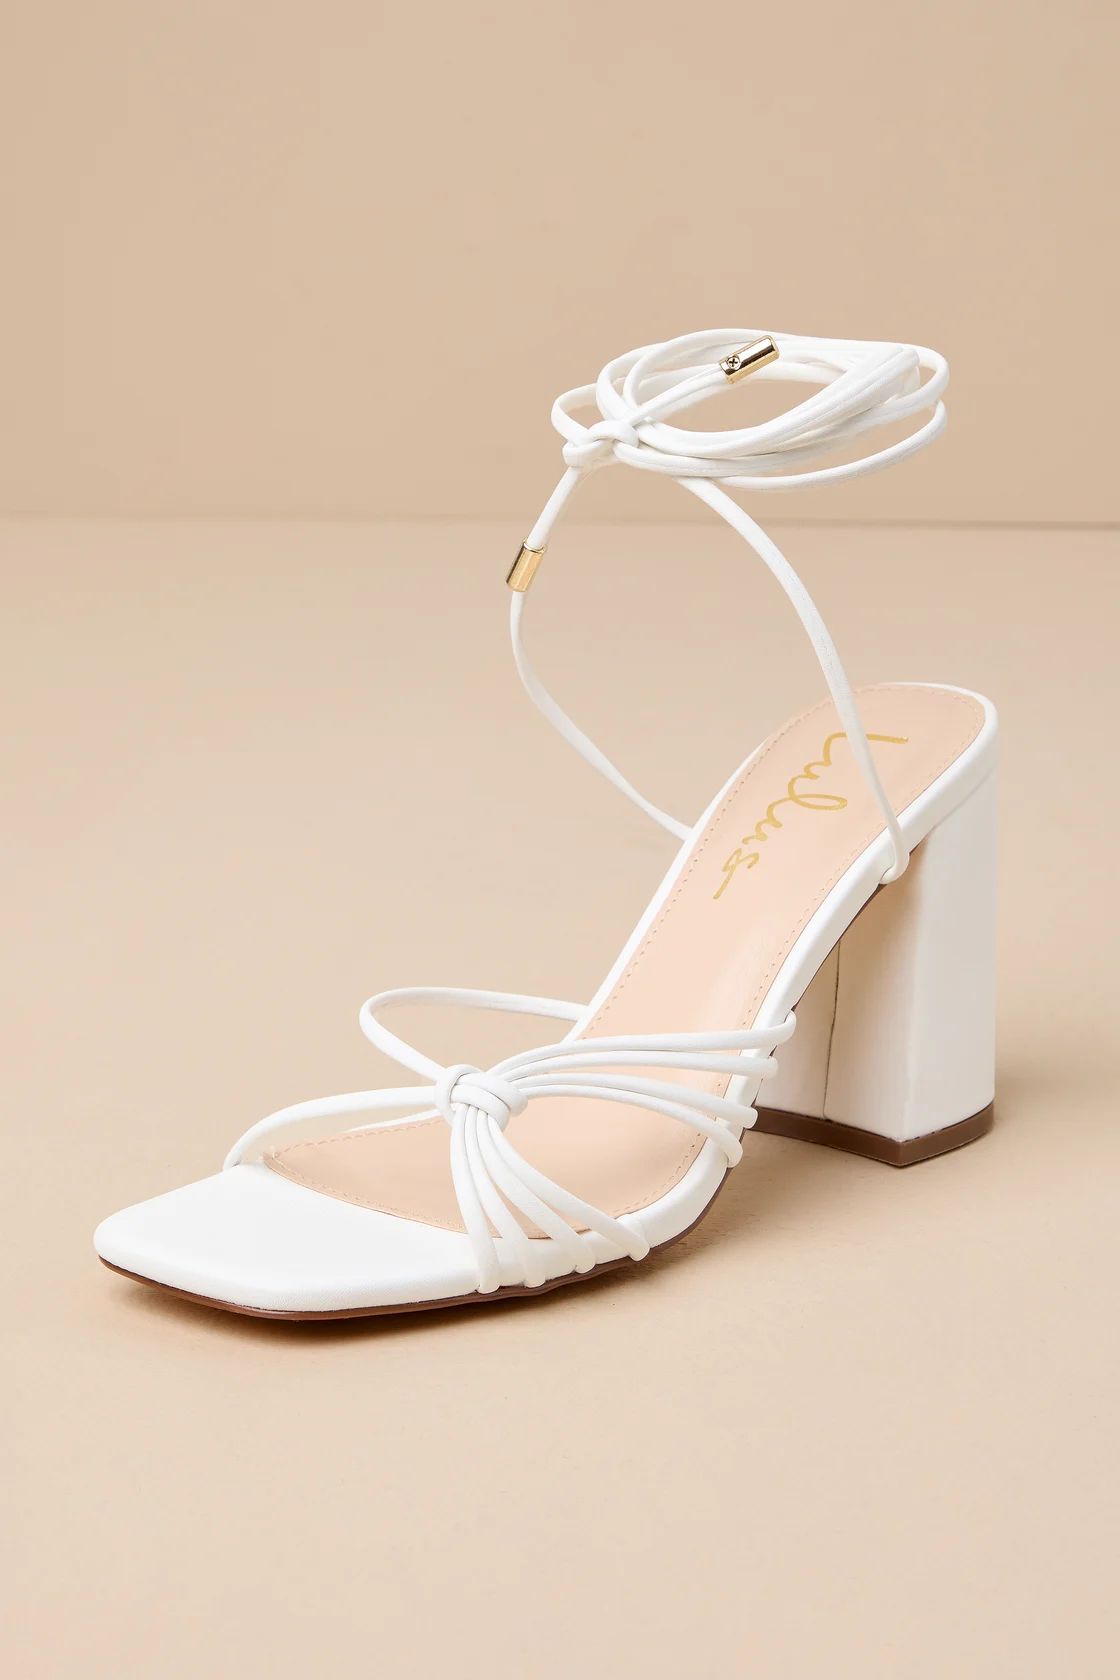 Nouvel White Strappy Lace-Up High Heel Sandals | Lulus